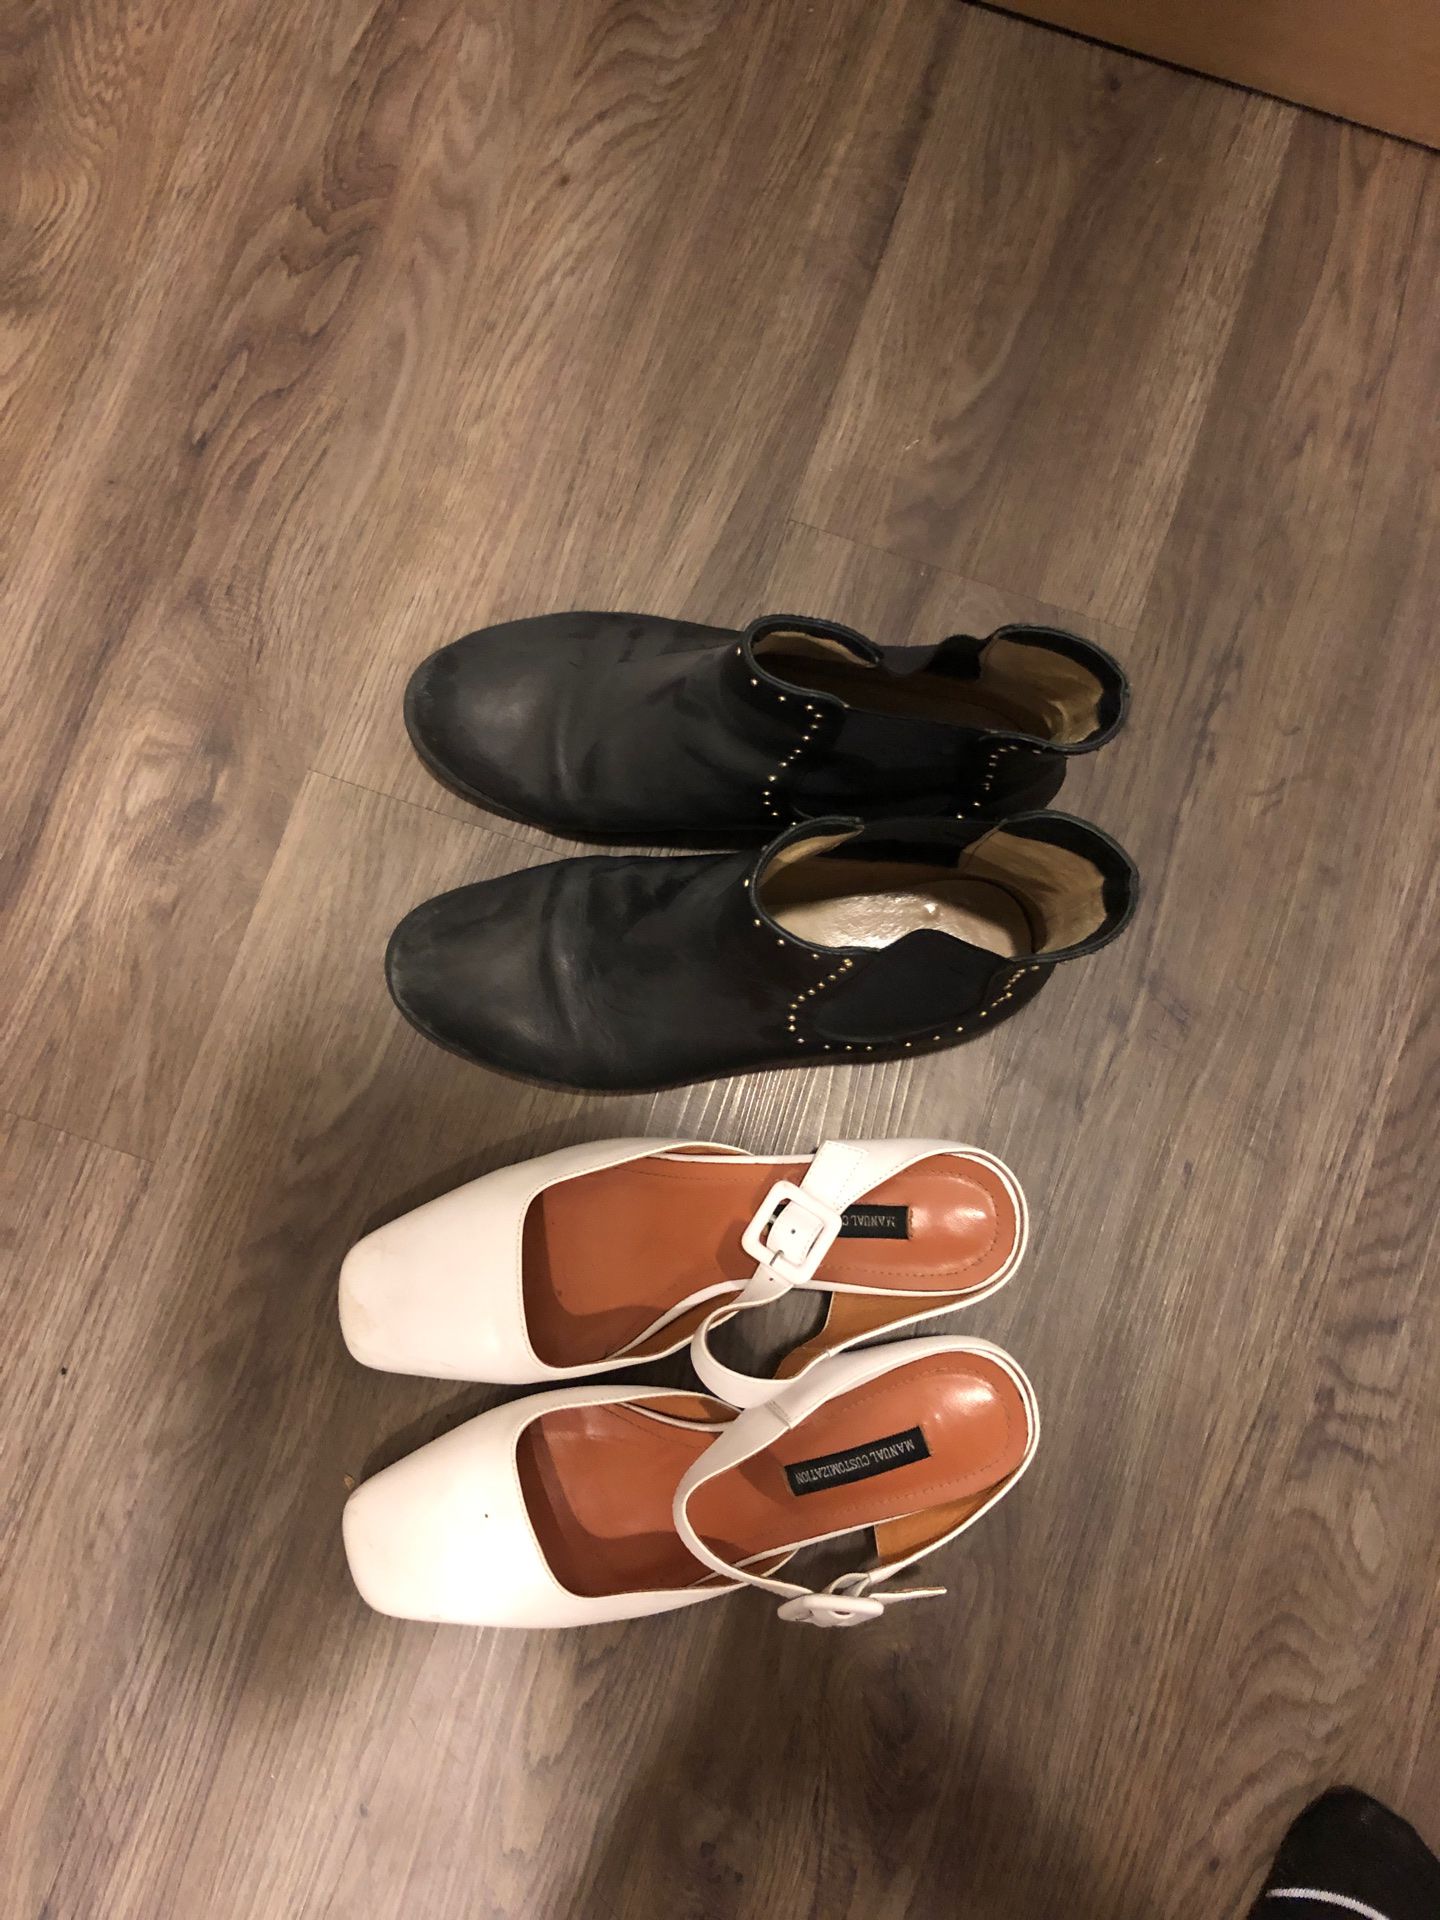 Boots and Summer shoes for free